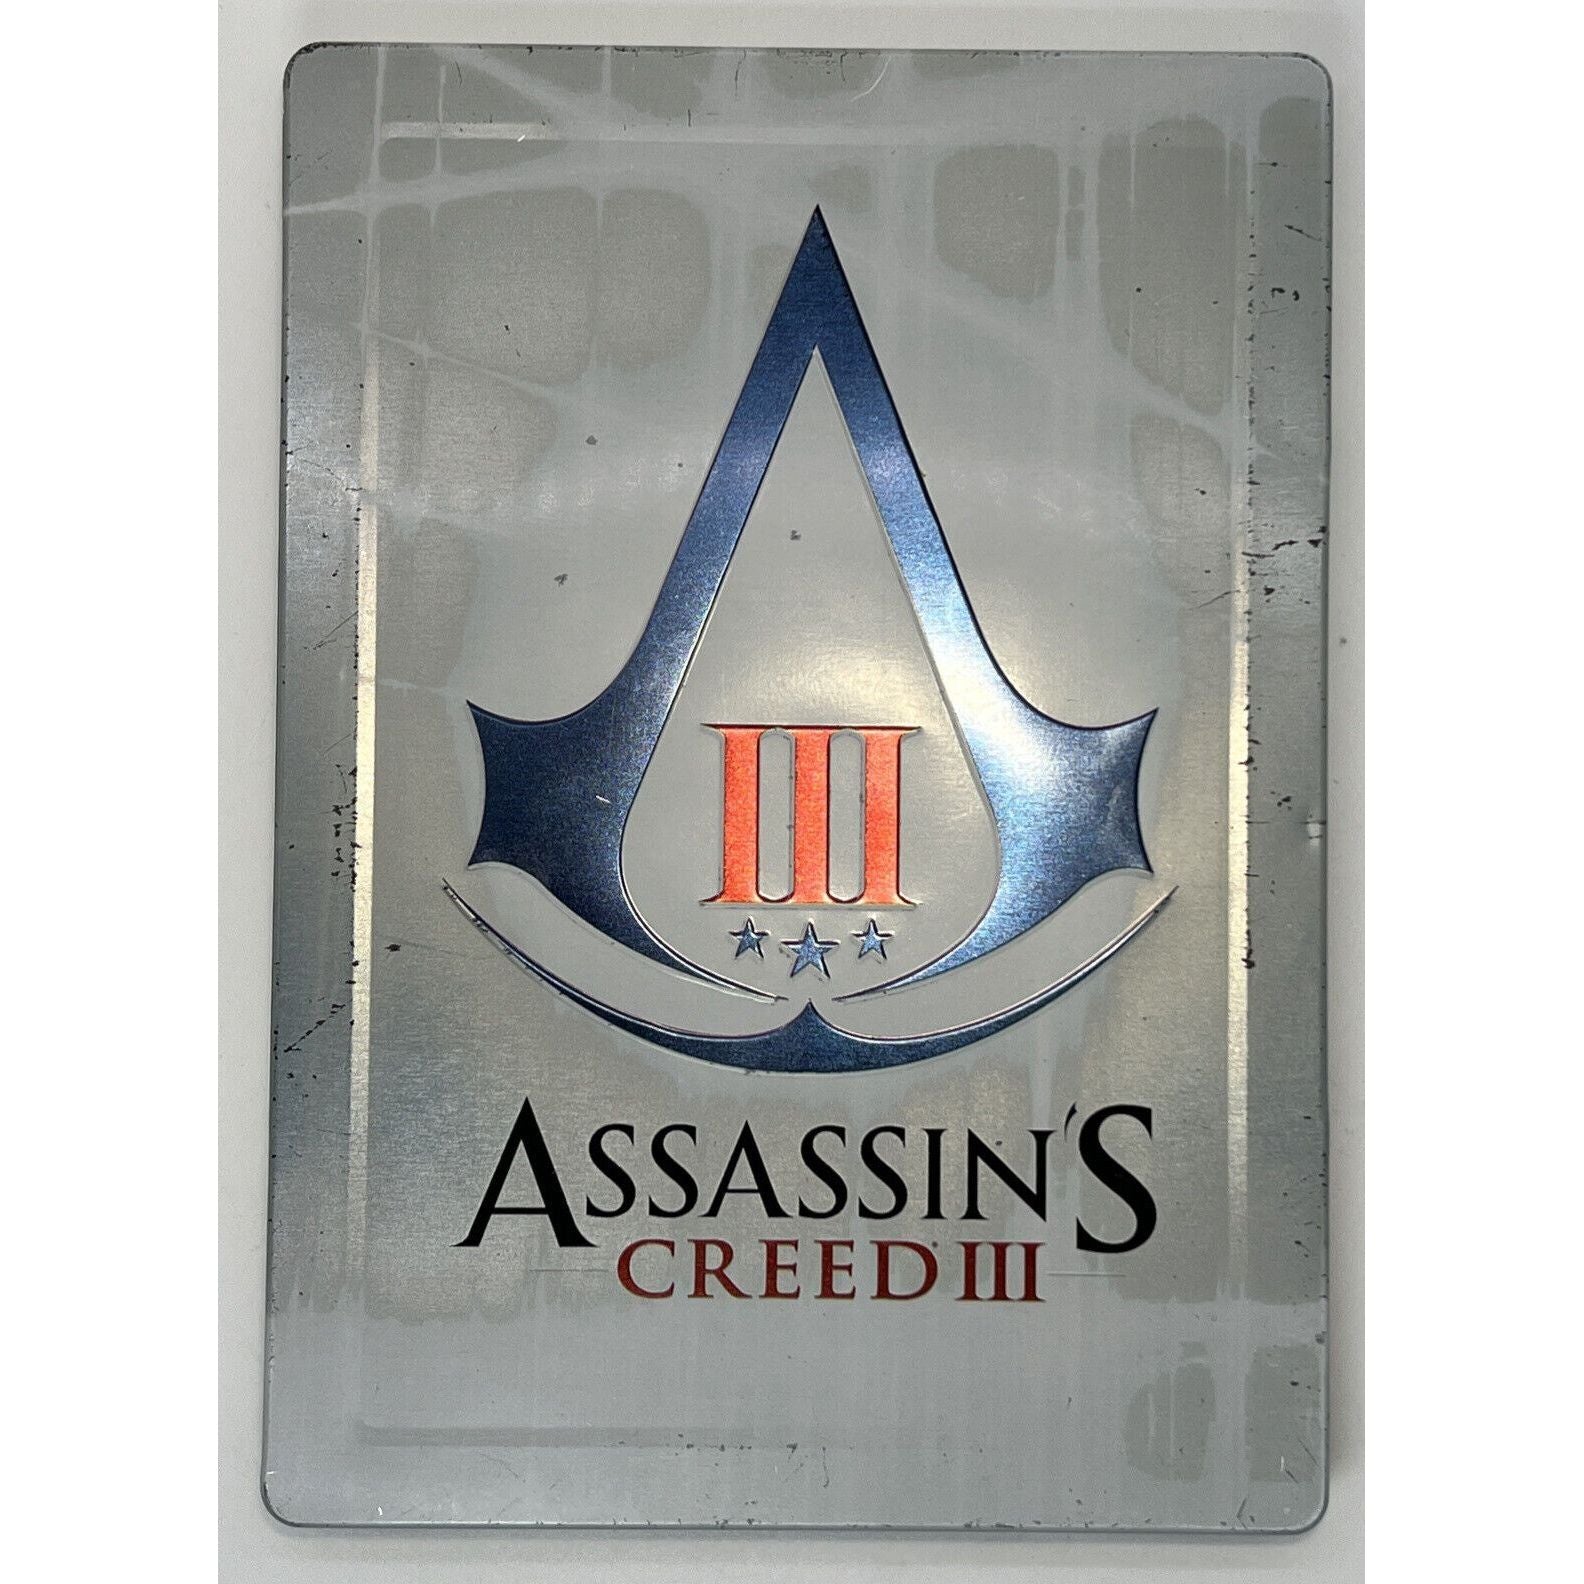 PS3 - Assassin's Creed III Special Edition Tin